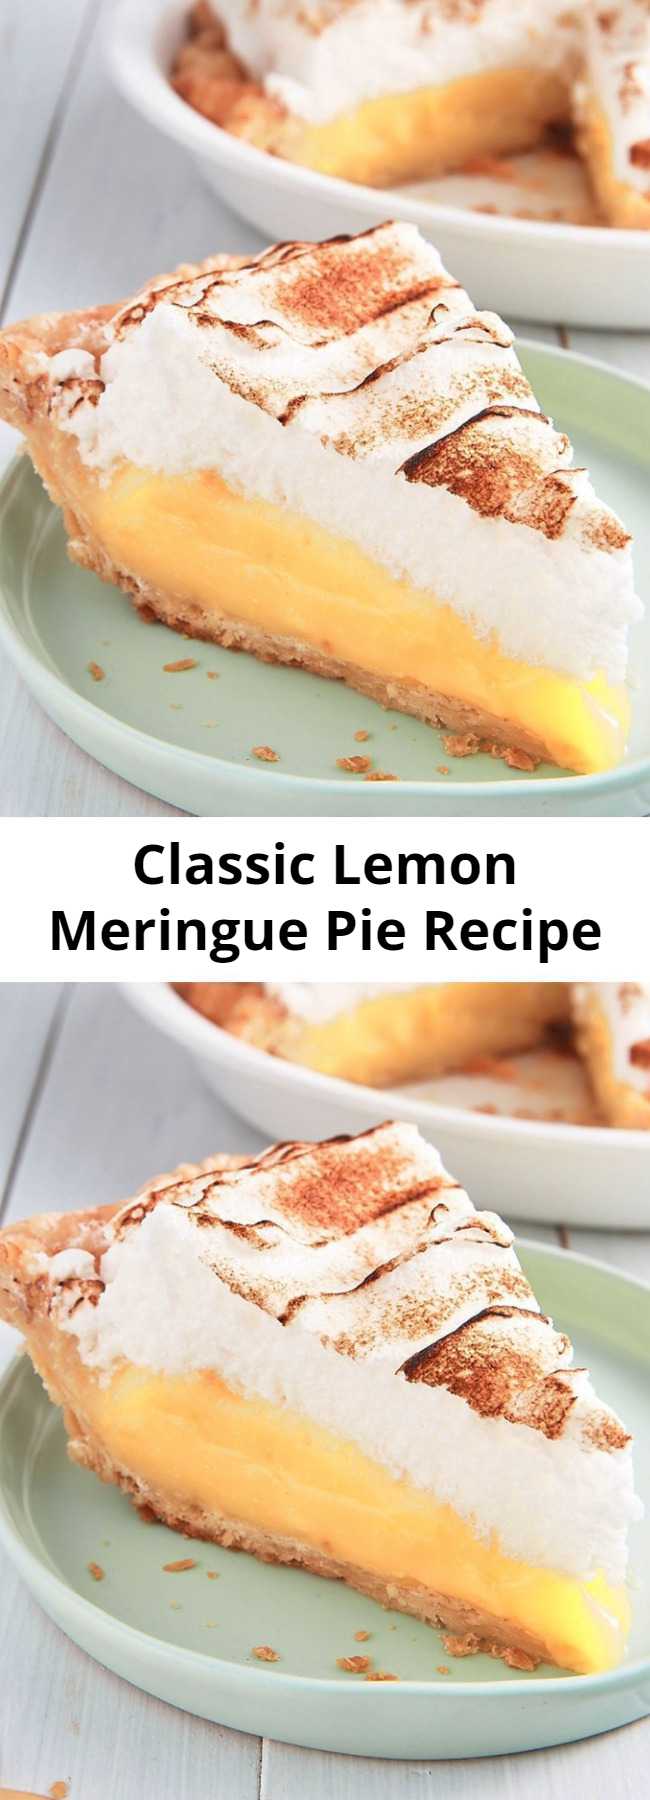 Classic Lemon Meringue Pie Recipe - This Lemon Meringue Pie uses both lemon zest and juice to strike the perfect balance between sweet and tart, plus it has a showstopping meringue topping.